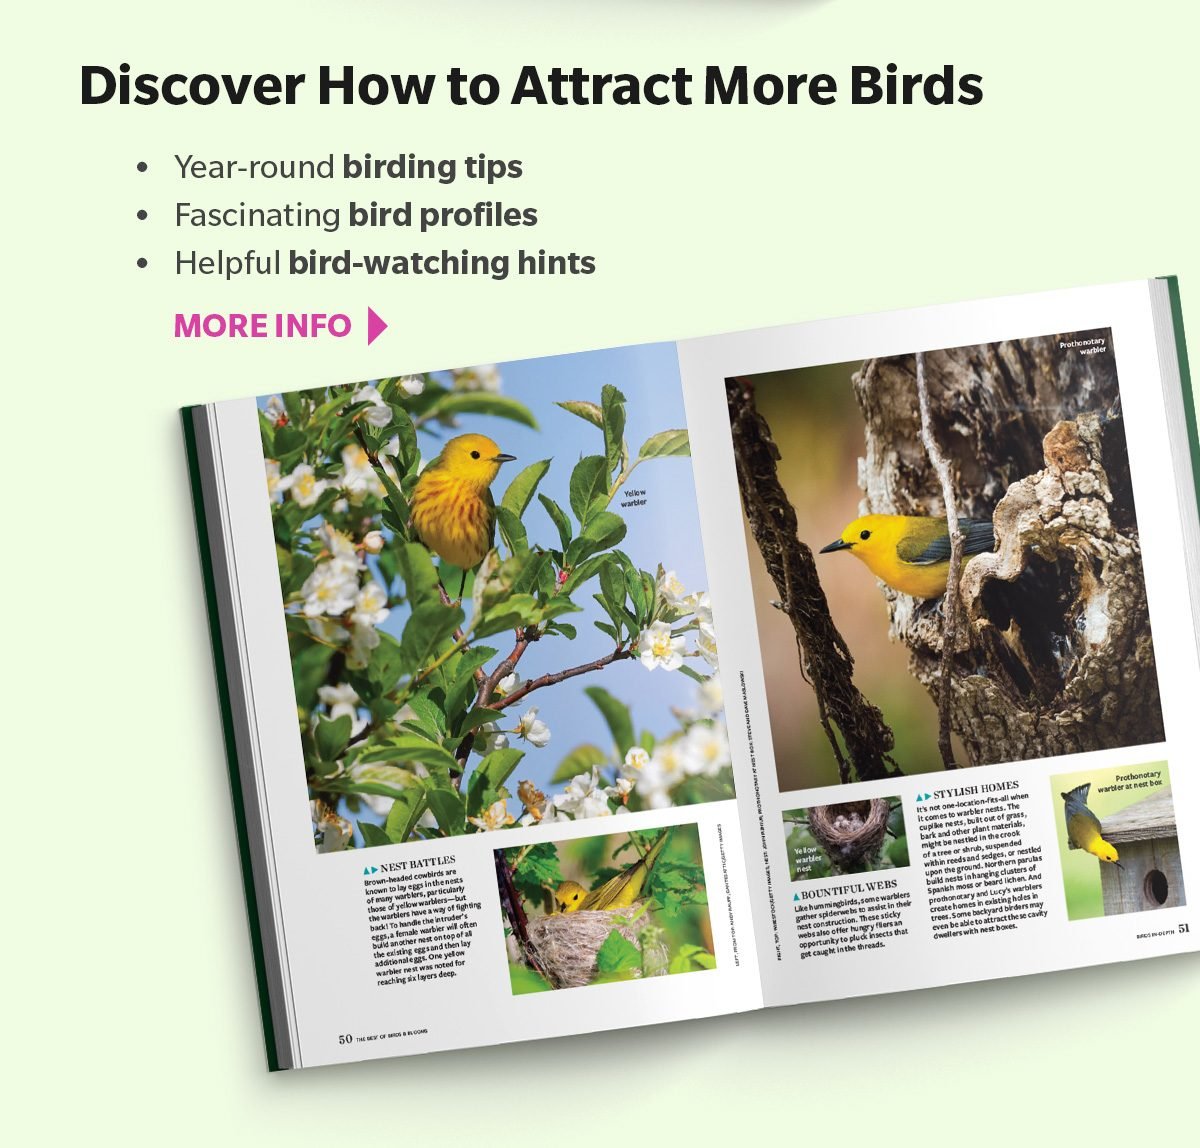 Discover How to Attract More Birds